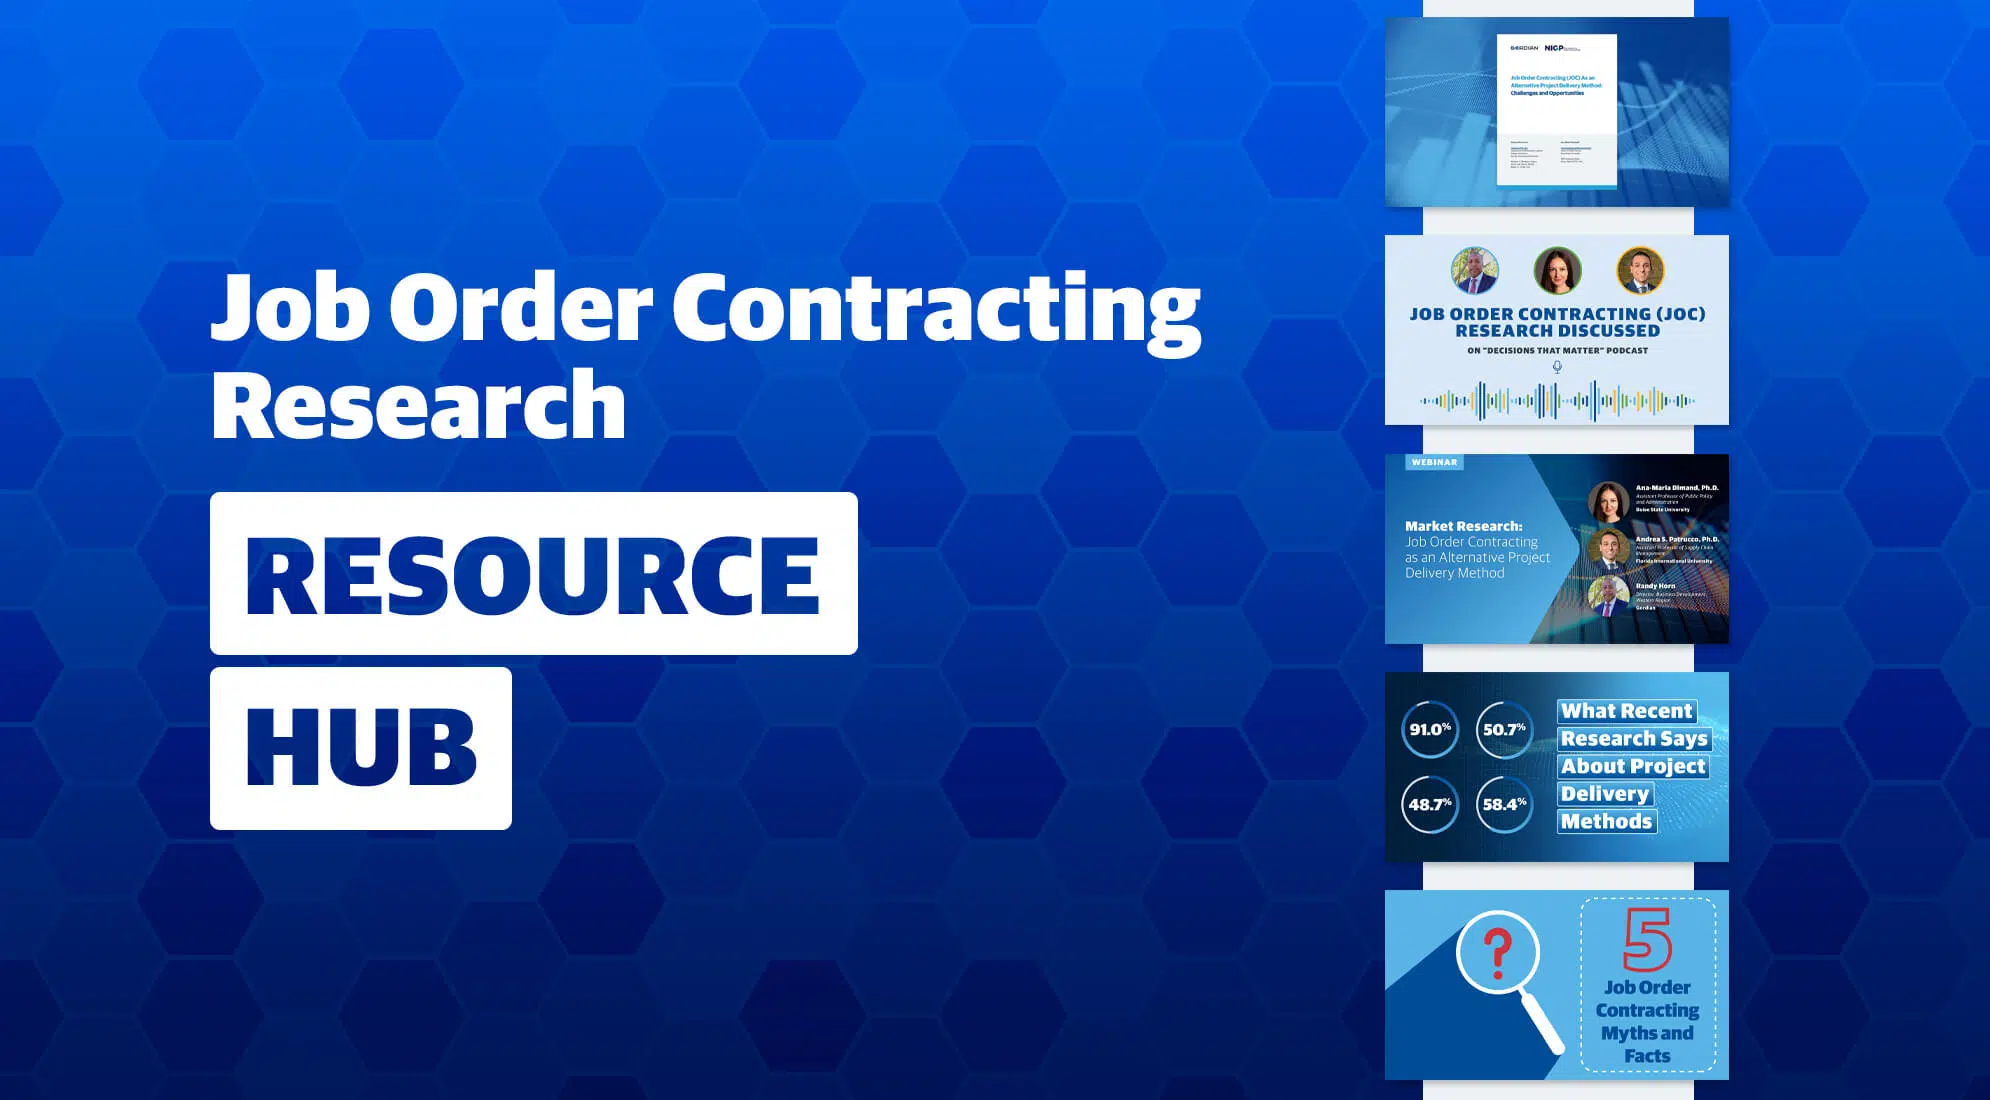 Access this suite of resources about Job Order Contracting Research.